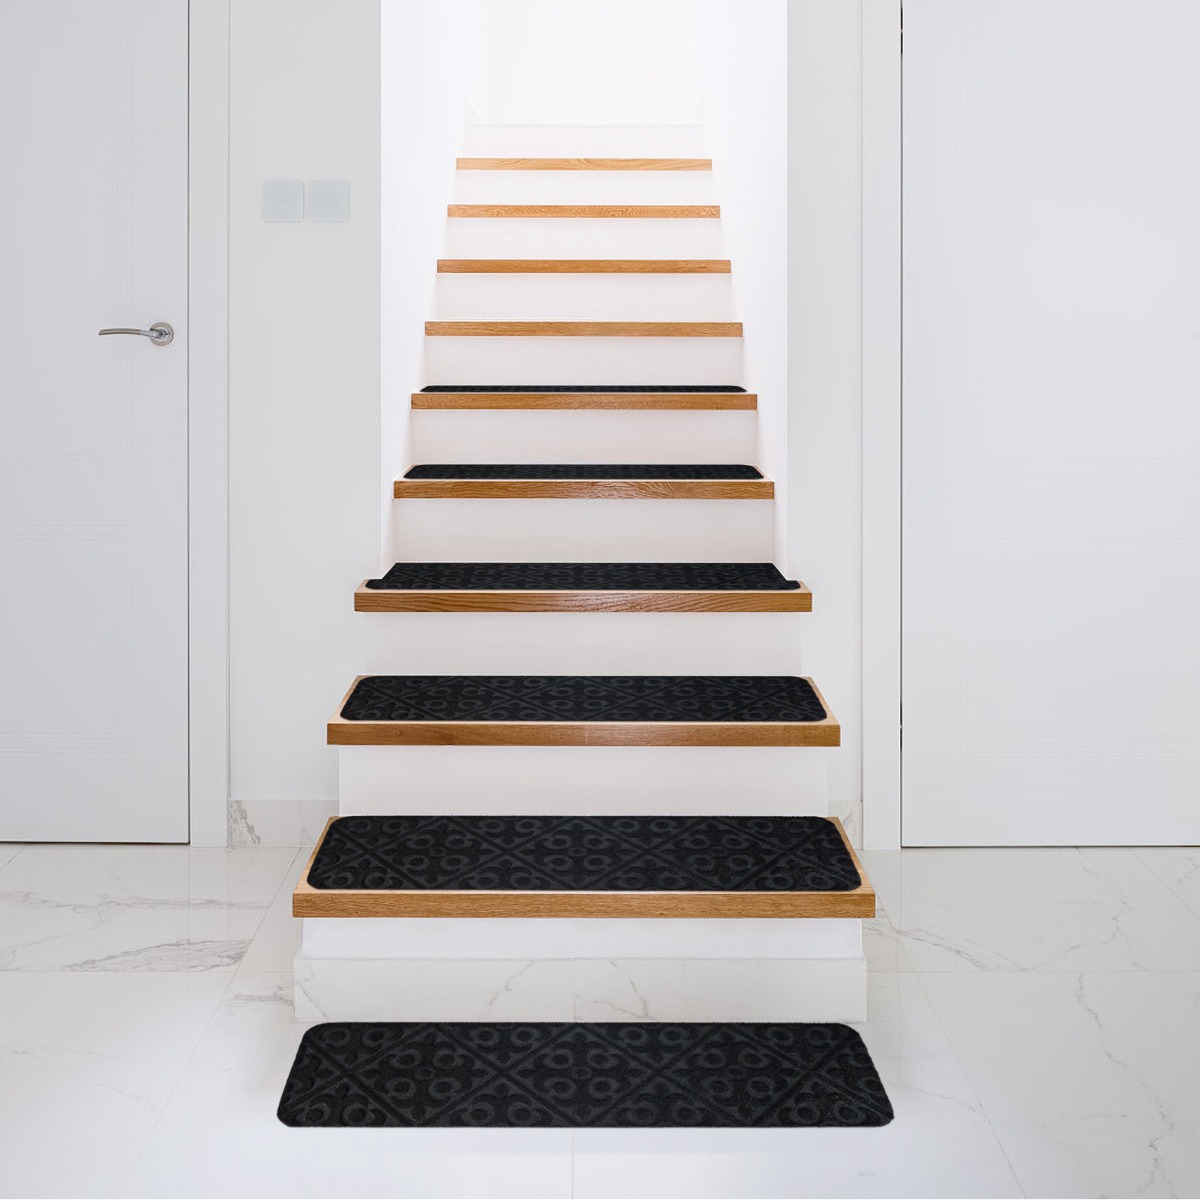 15 PCS Slip-resistant Stair Mats with Waterproof Material for Kids/Elderly/Pets